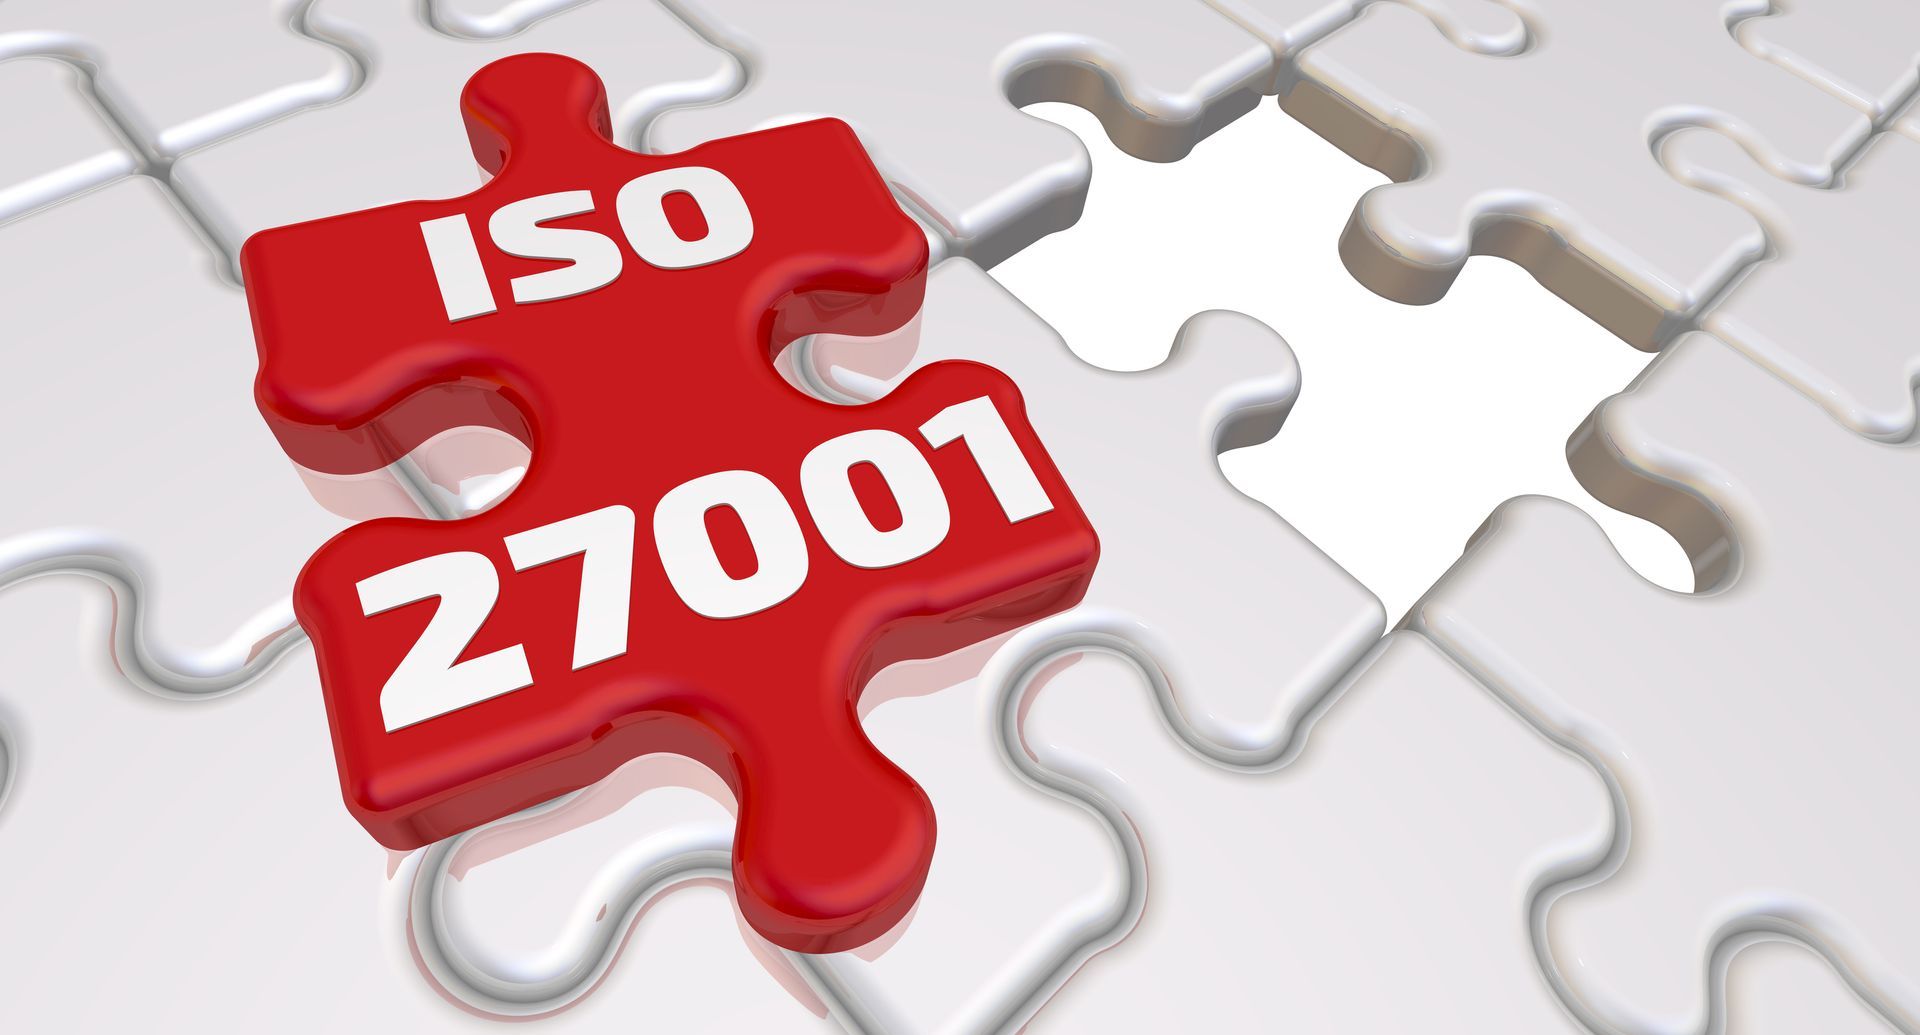 ISO 27001 Information Security Management System (ISMS)  ISO 27001:2022, developed by the International Organisation for Standardisation (ISO), is a leading standard for Information Security Management Systems (ISMS). It provides a comprehensive framework for organizations to establish, implement, maintain, and continually improve their information security management system.